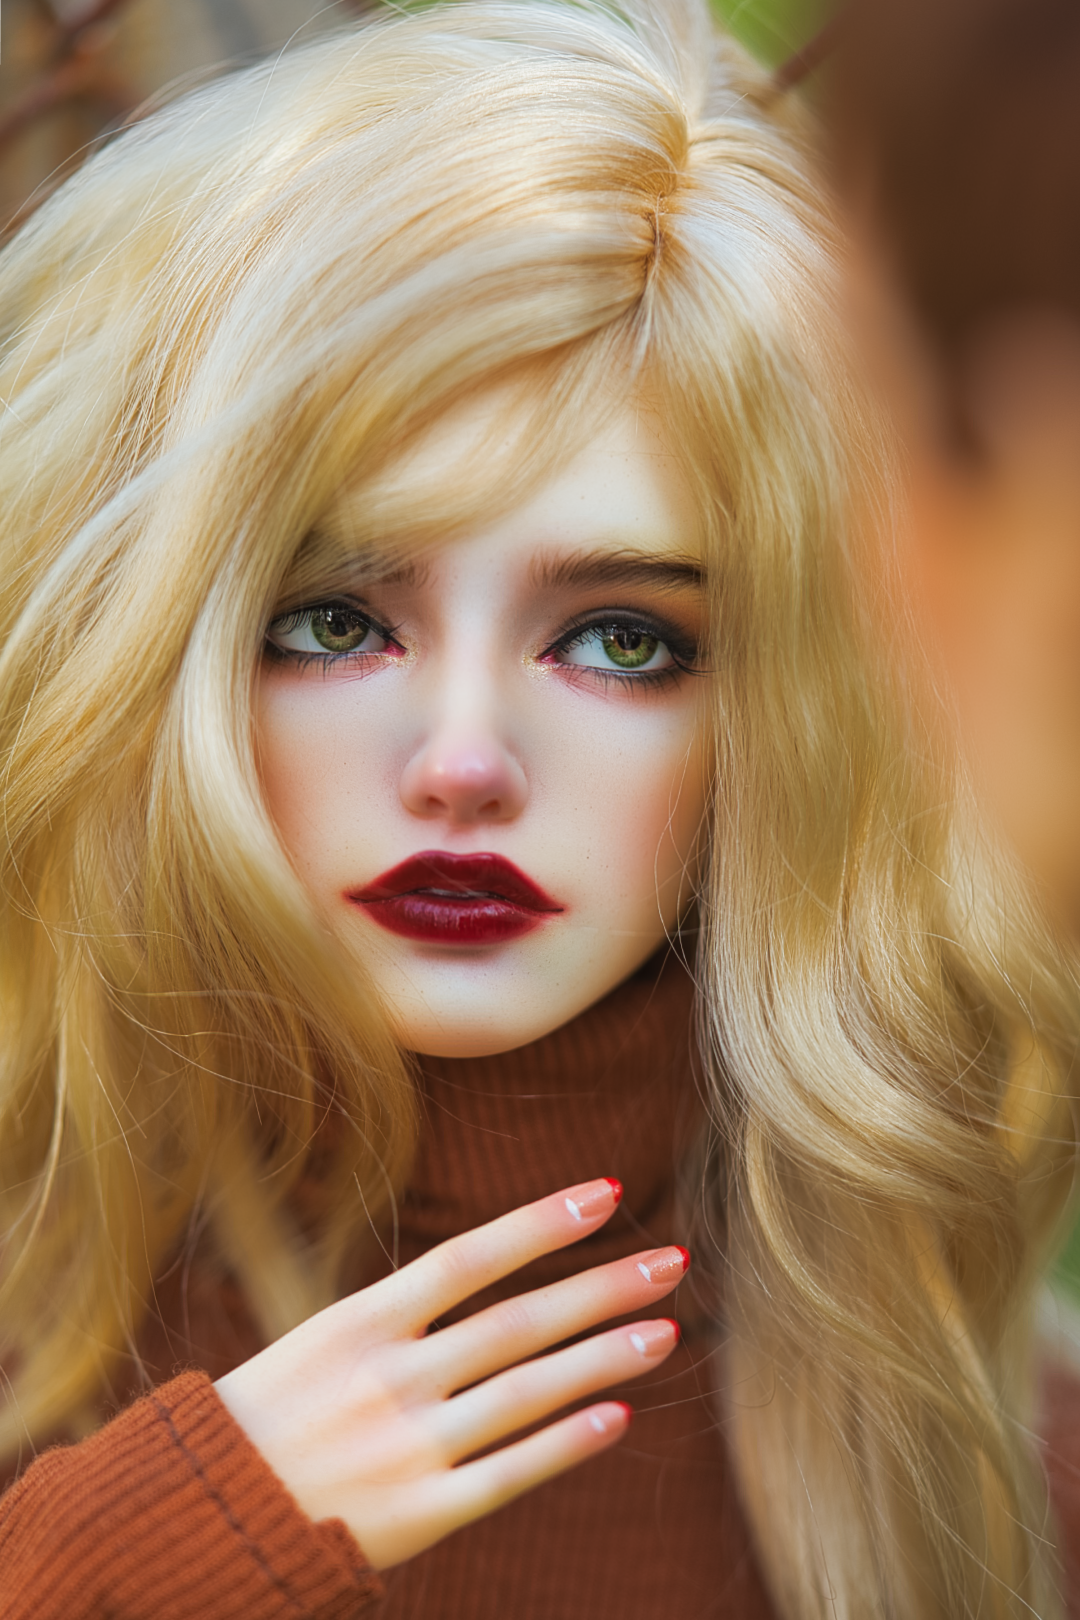 A female doll with long blonde hair, dark red lips wearing a flowy floral top